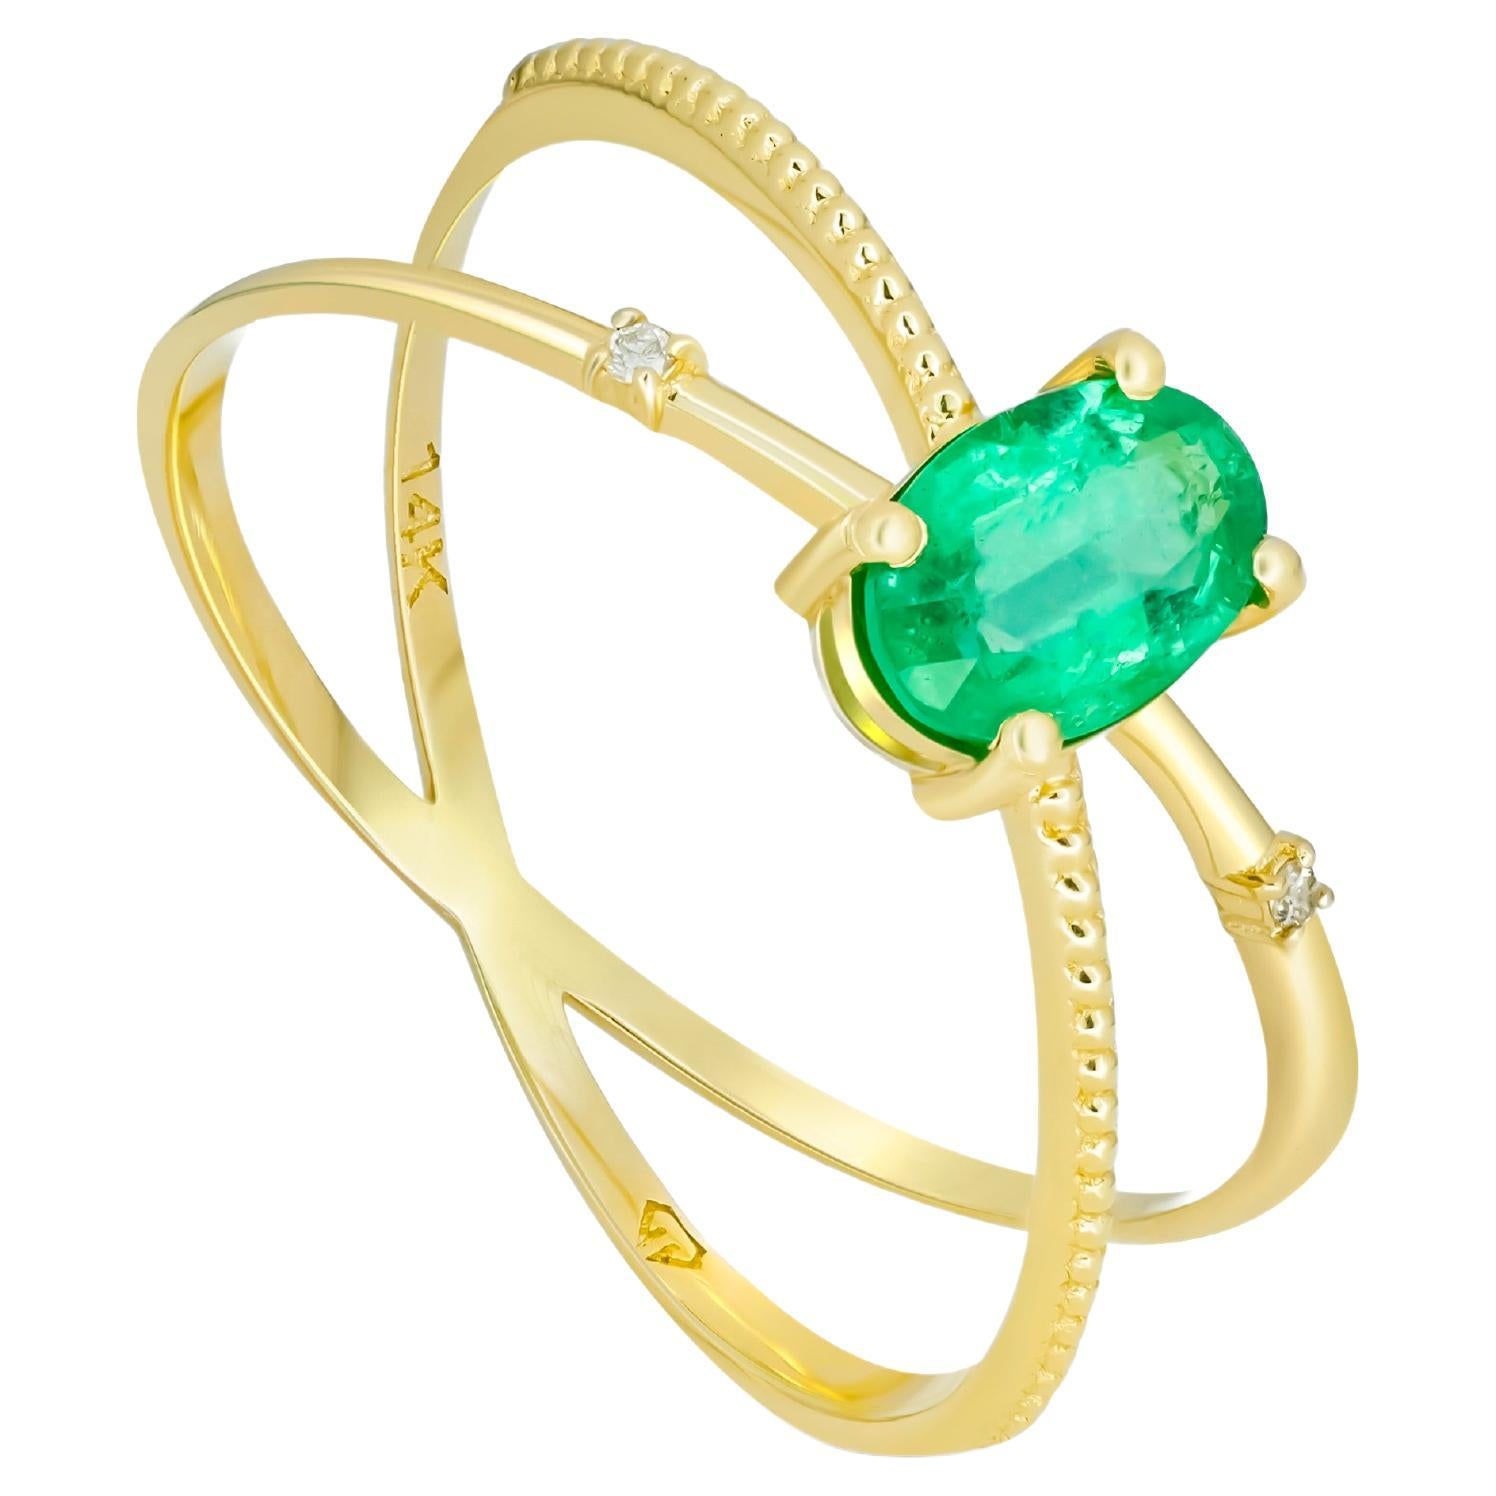 Emerald and diamonds 14k gold ring!